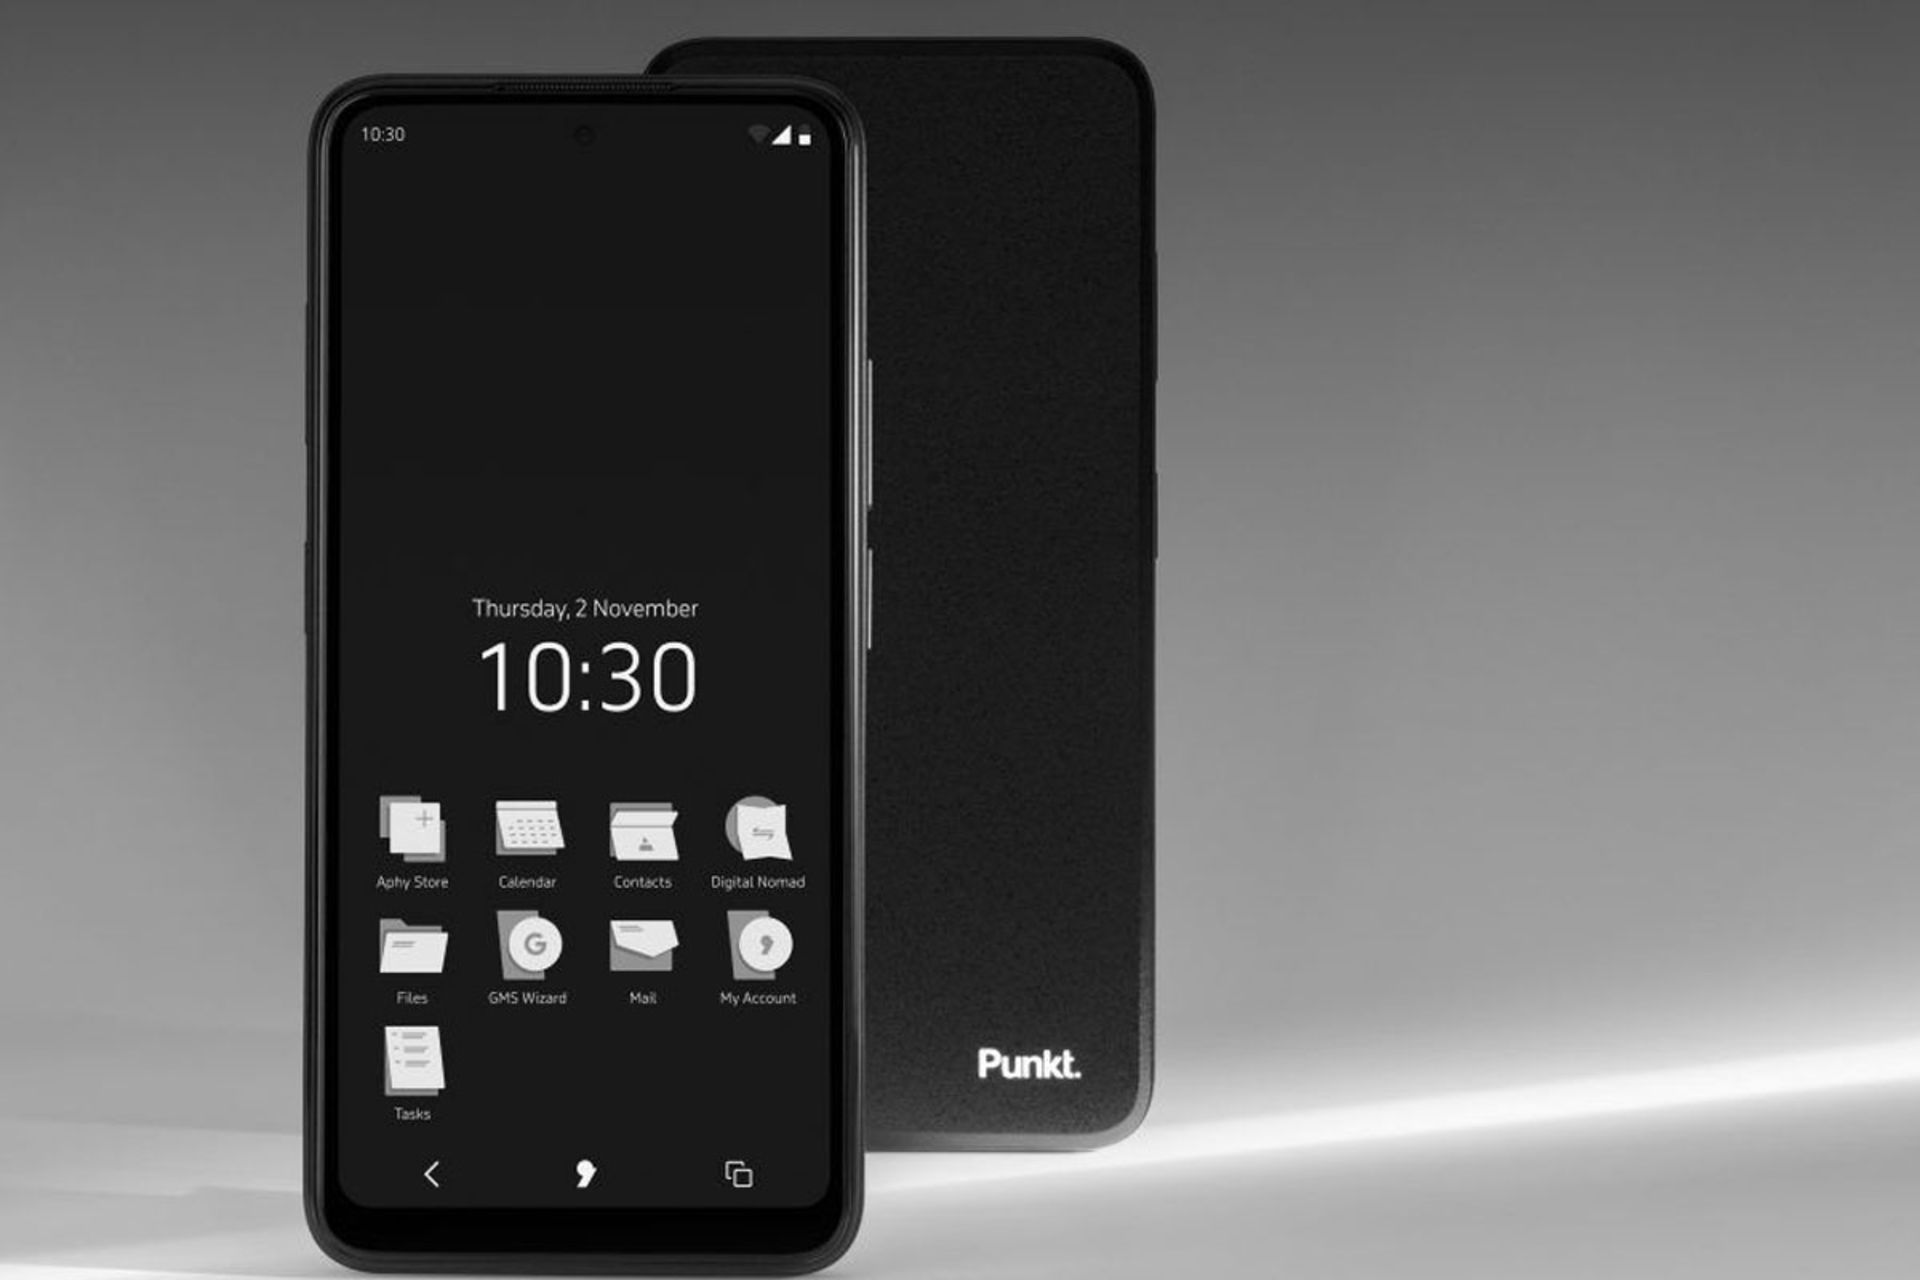 Apostrophy operating system installed on Punkt MC02 phone